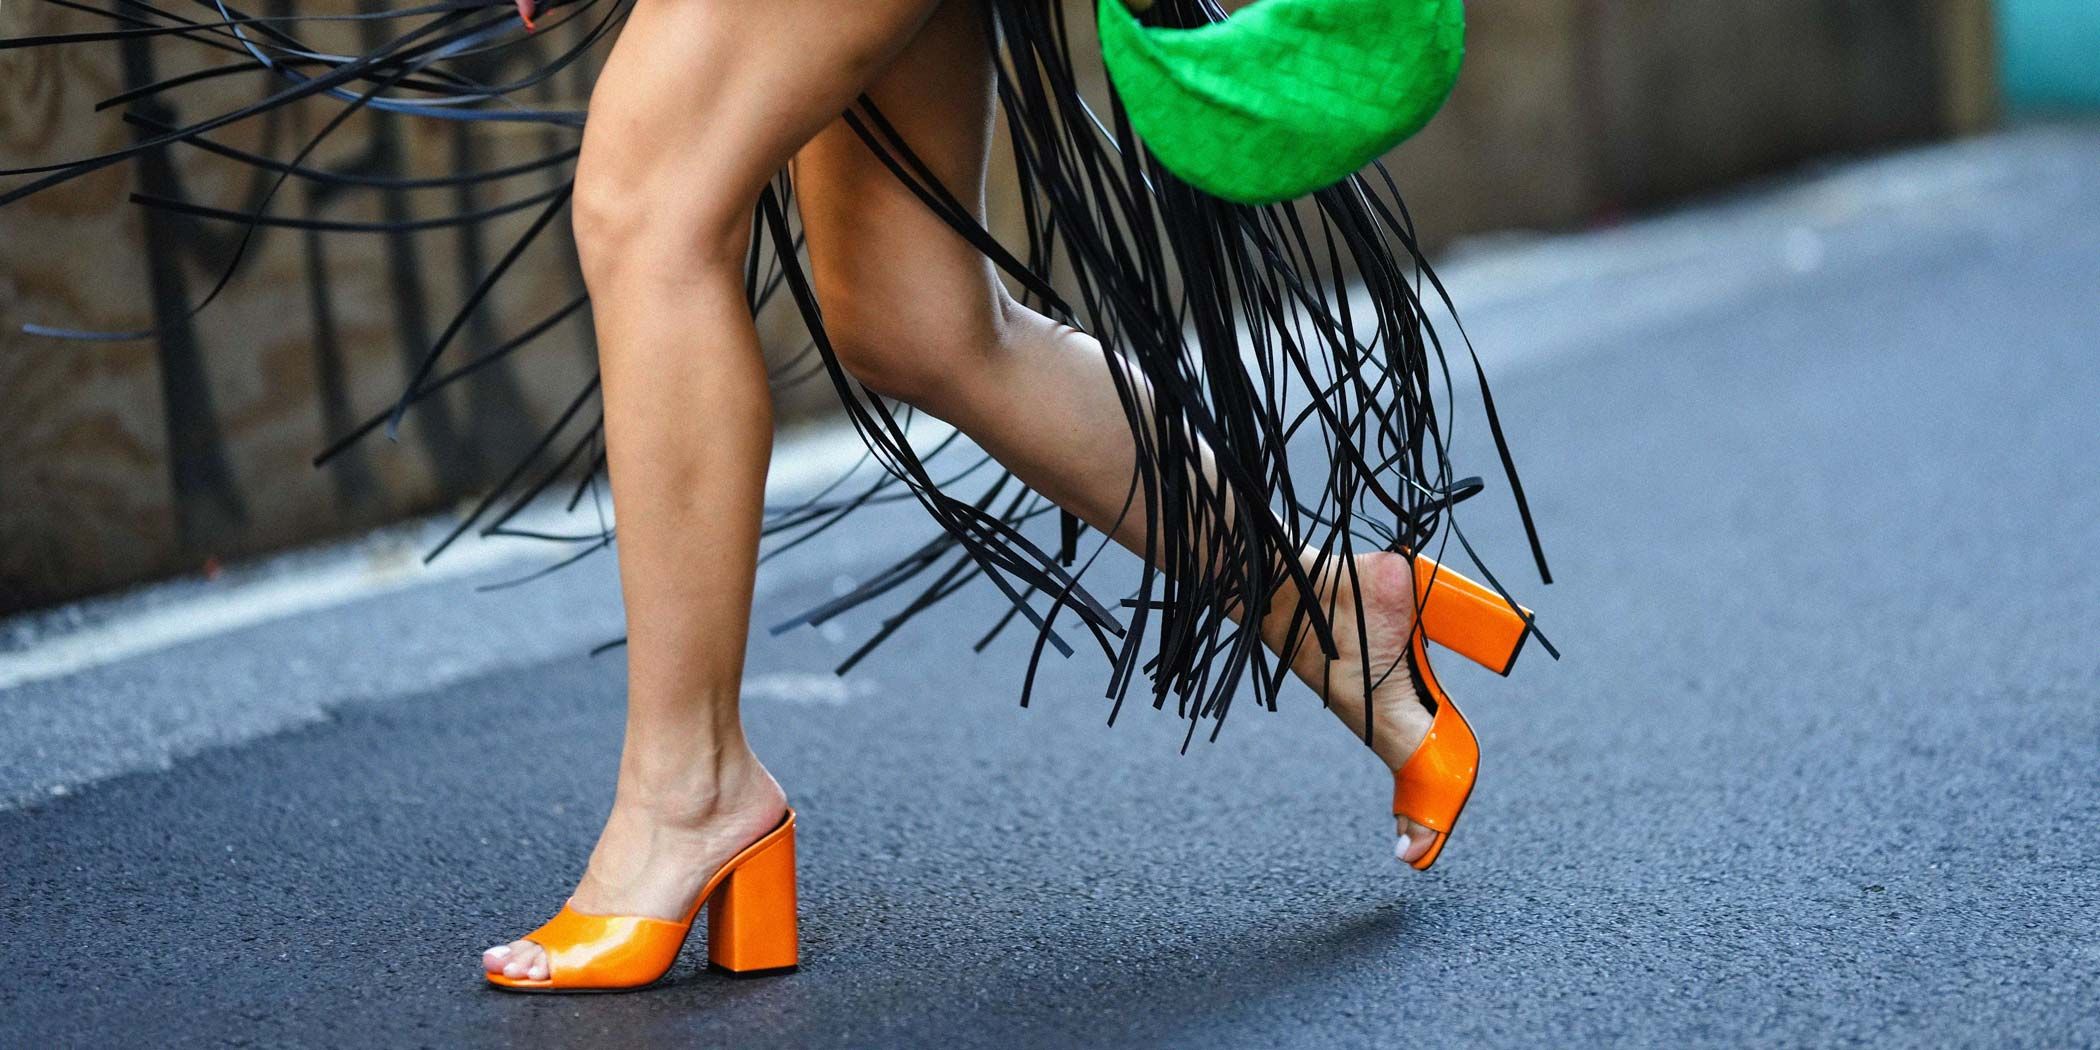 10 Best Types Of Women Summer Sandals To Rock Your Look-Dream Pairs